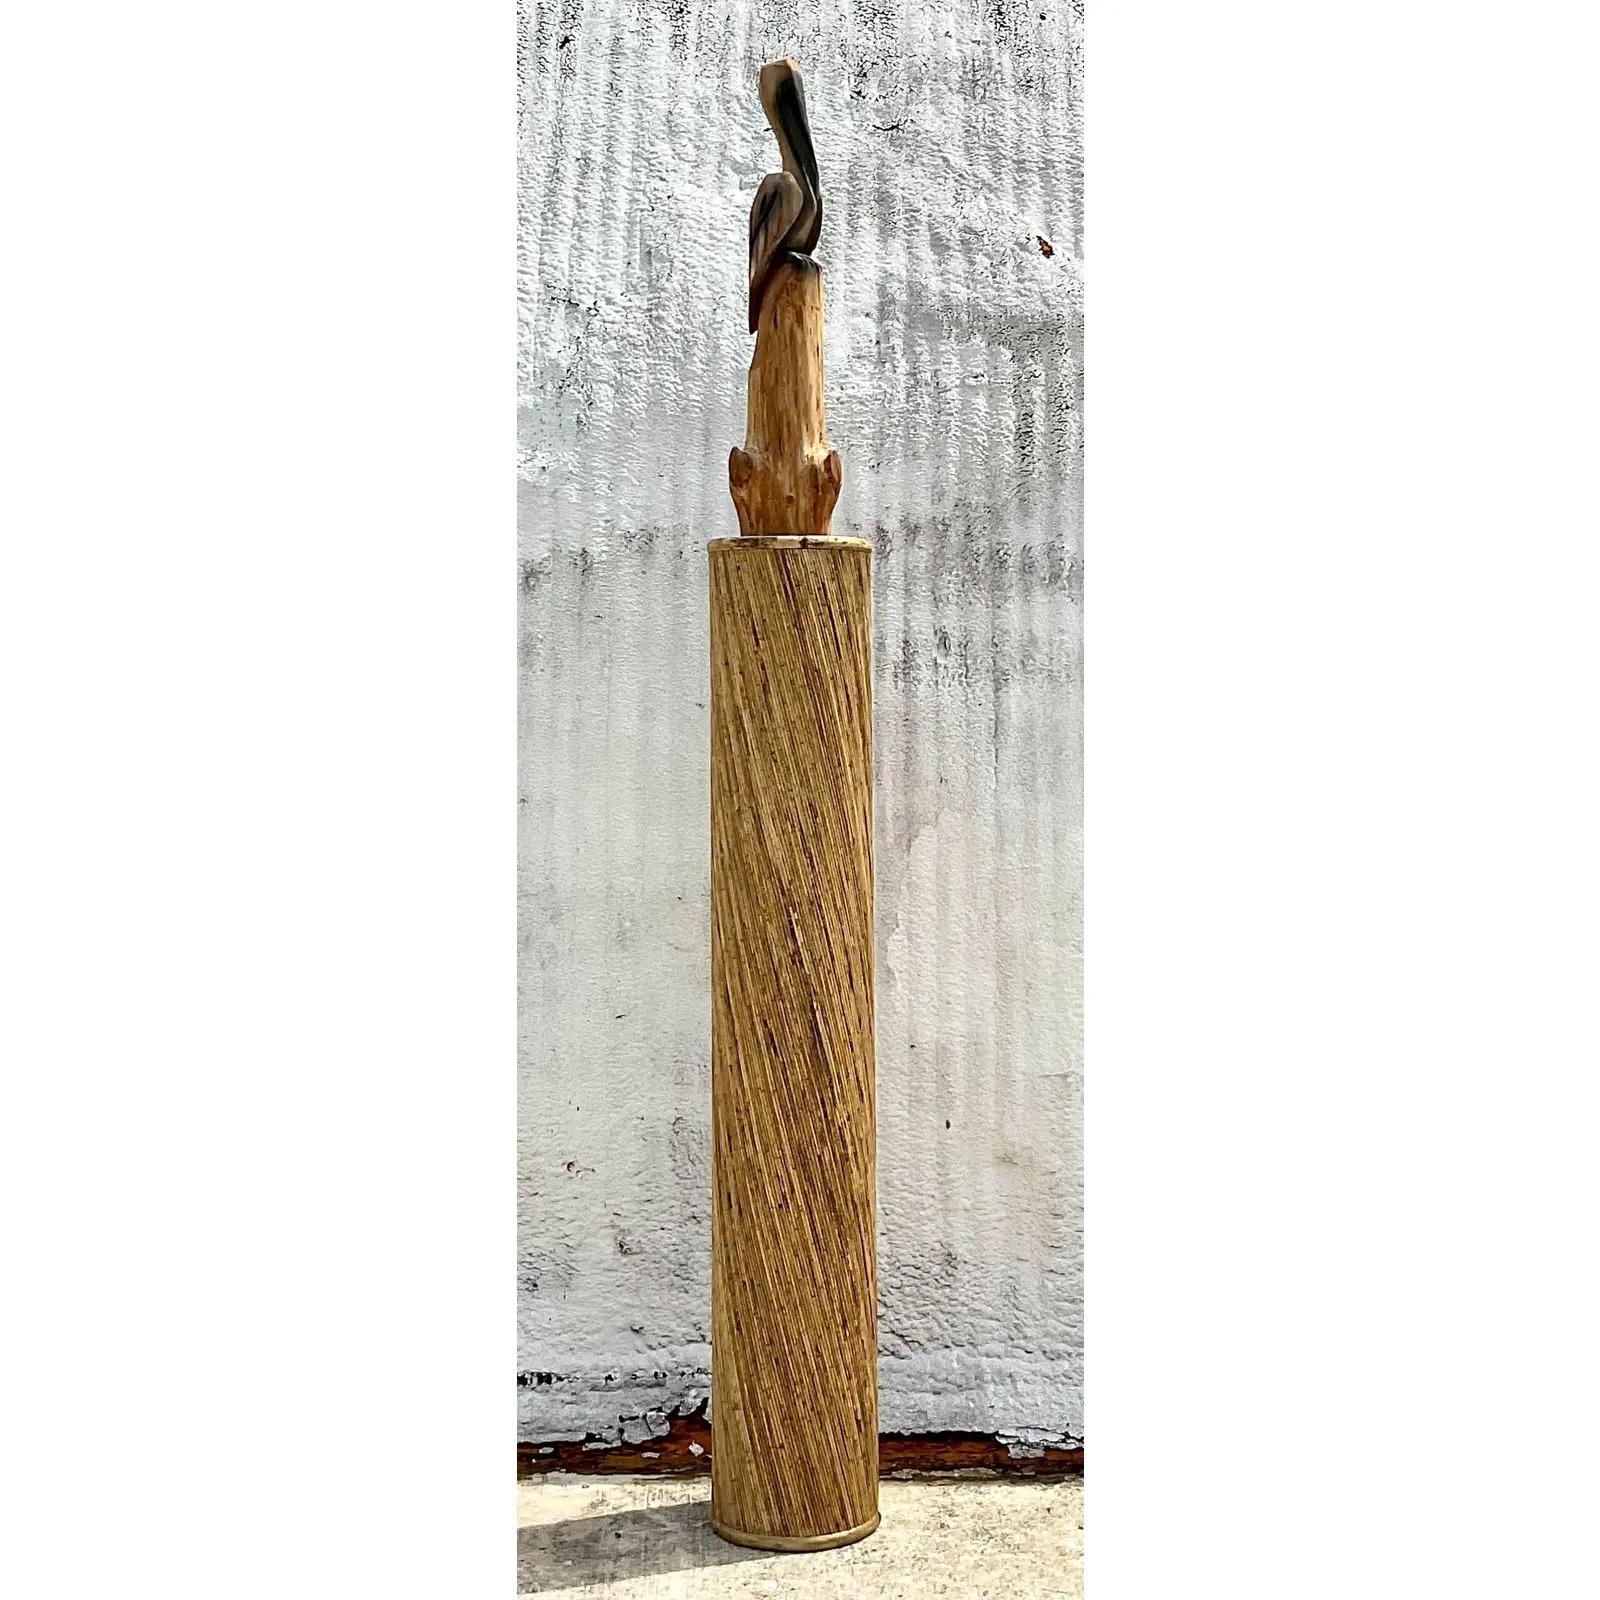 A gorgeous vintage Coastal tall column. Constructed of a coiled pencil reed in a tortoise finish. Perfect as a stand alone column or a tall sculpture pedestal. You decide! Acquired from a Palm Beach estate. 